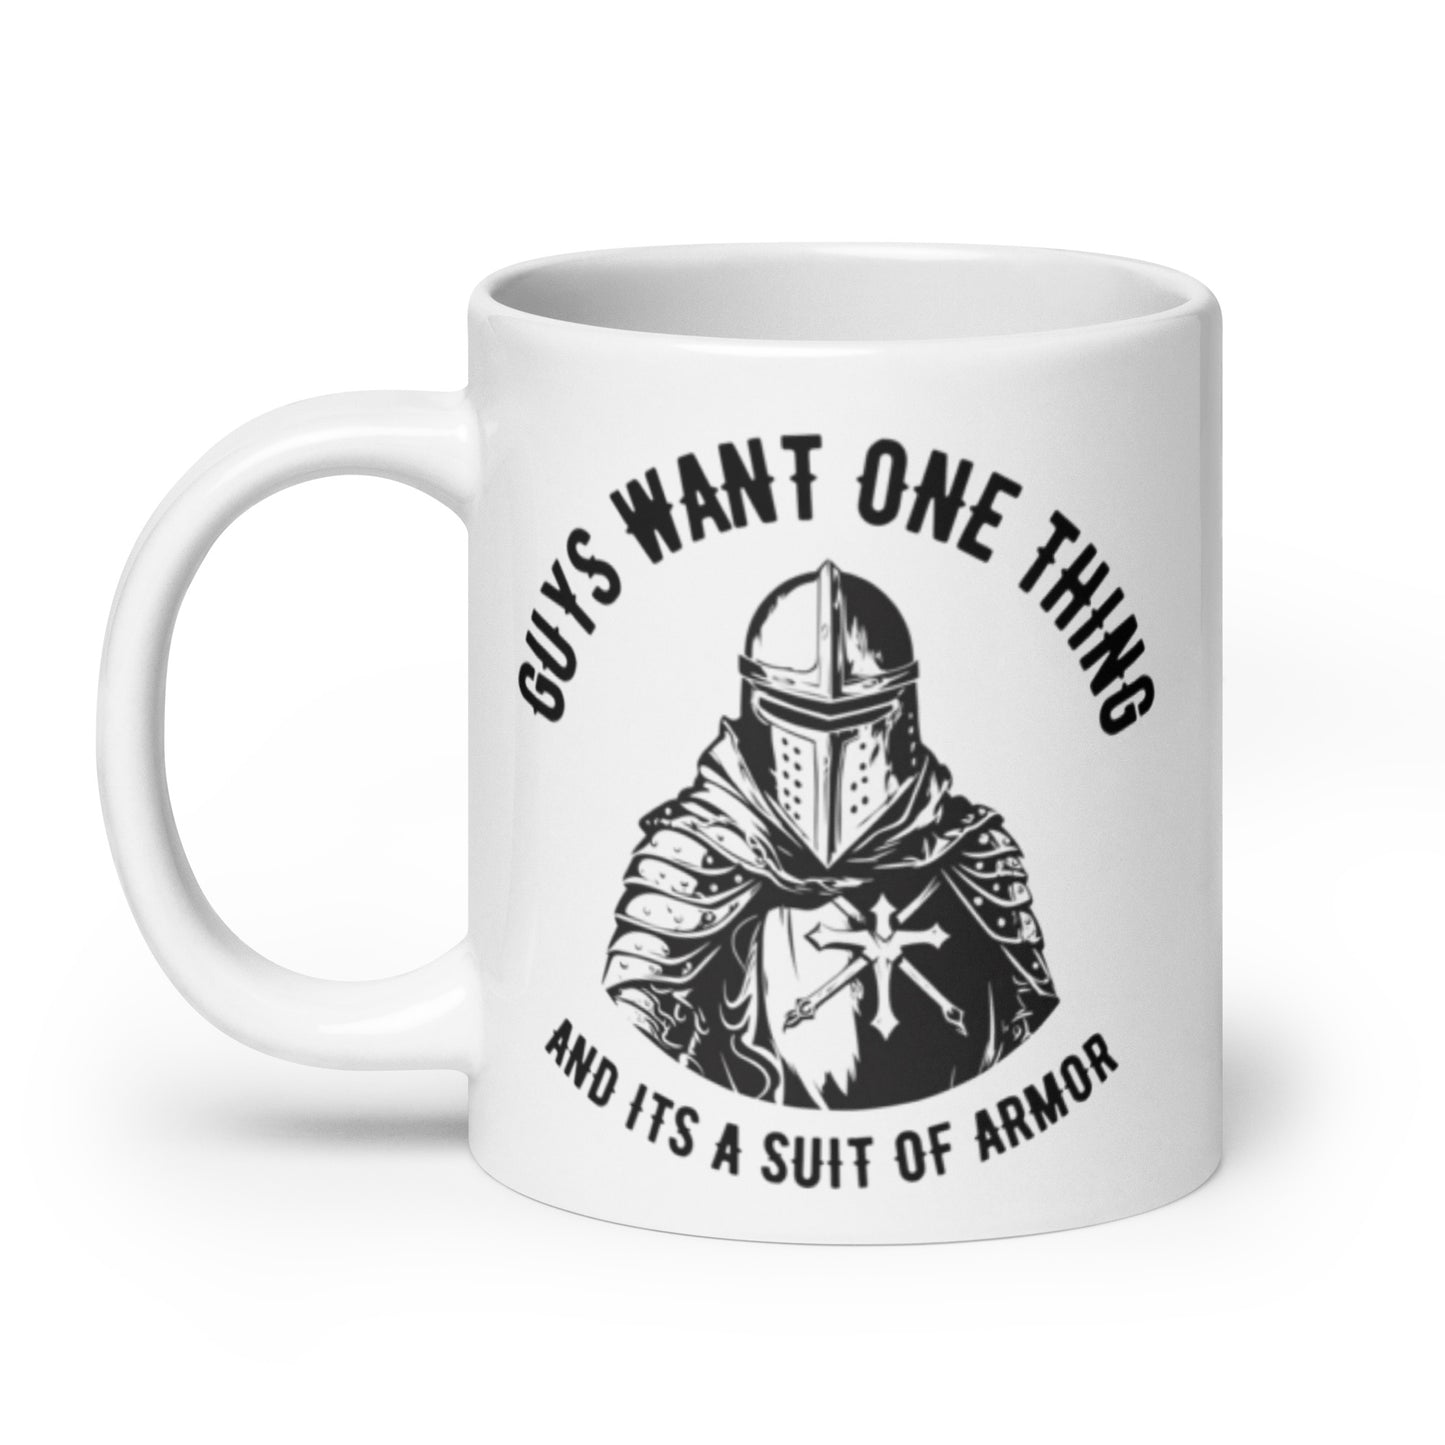 Guys Want One Thing, Suit of Armor Mug